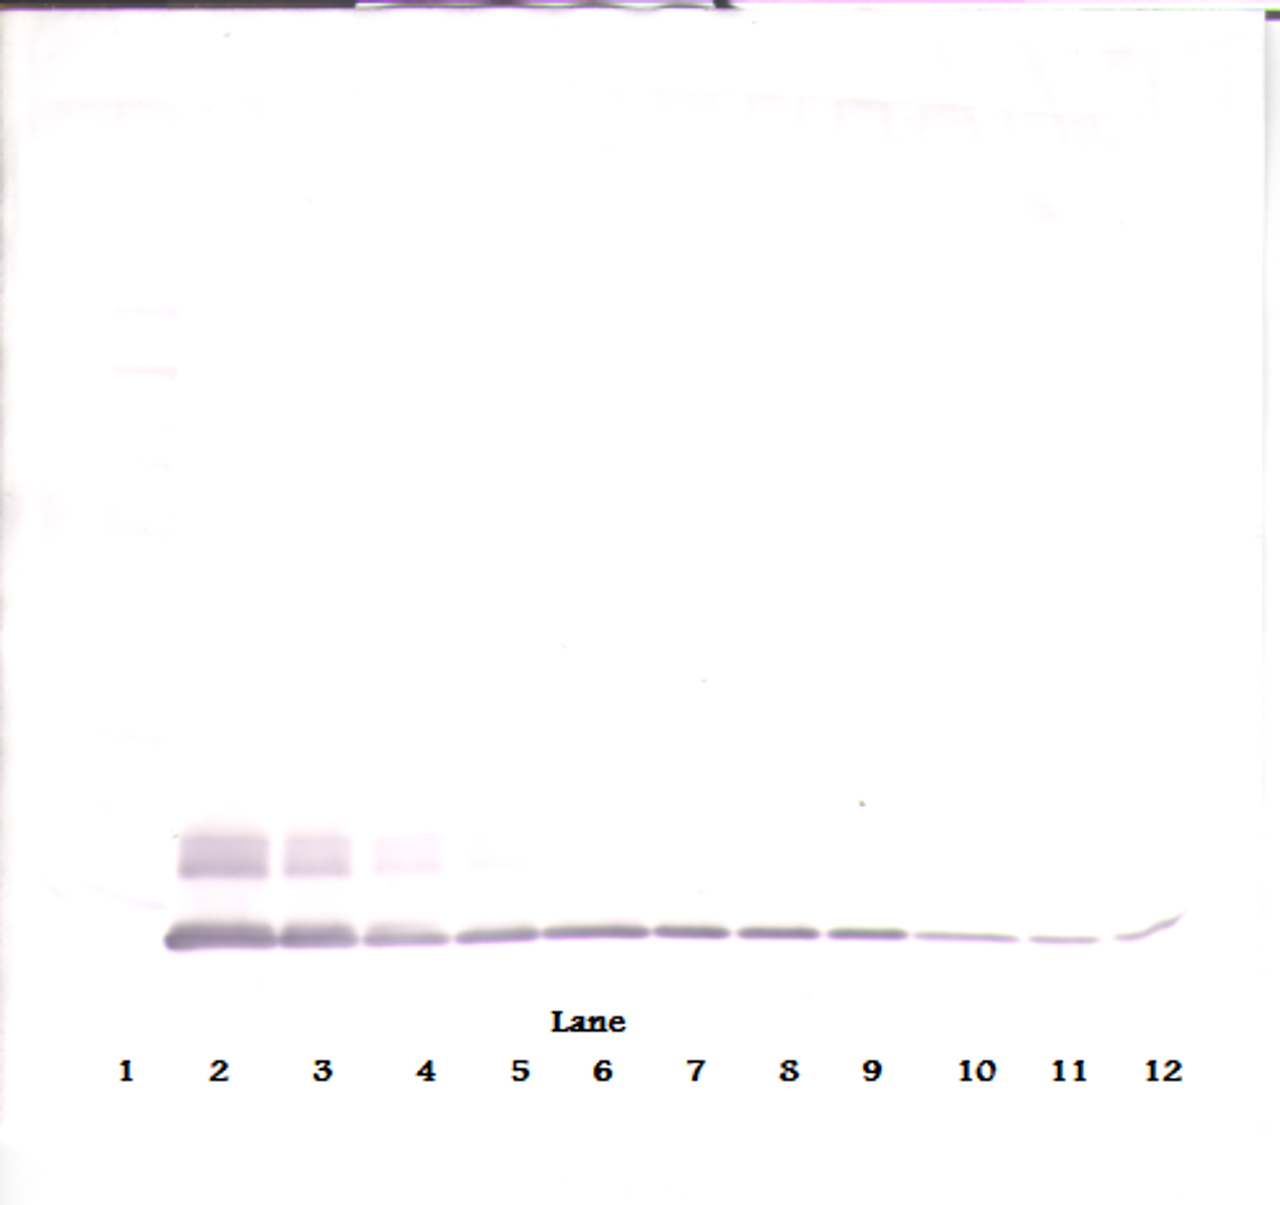 To detect hMCP-2 by Western Blot analysis this antibody can be used at a concentration of 0.1-0.2 ug/ml. Used in conjunction with compatible secondary reagents the detection limit for recombinant hMCP-2 is 1.5-3.0 ng/lane, under either reducing or non-reducing conditions.